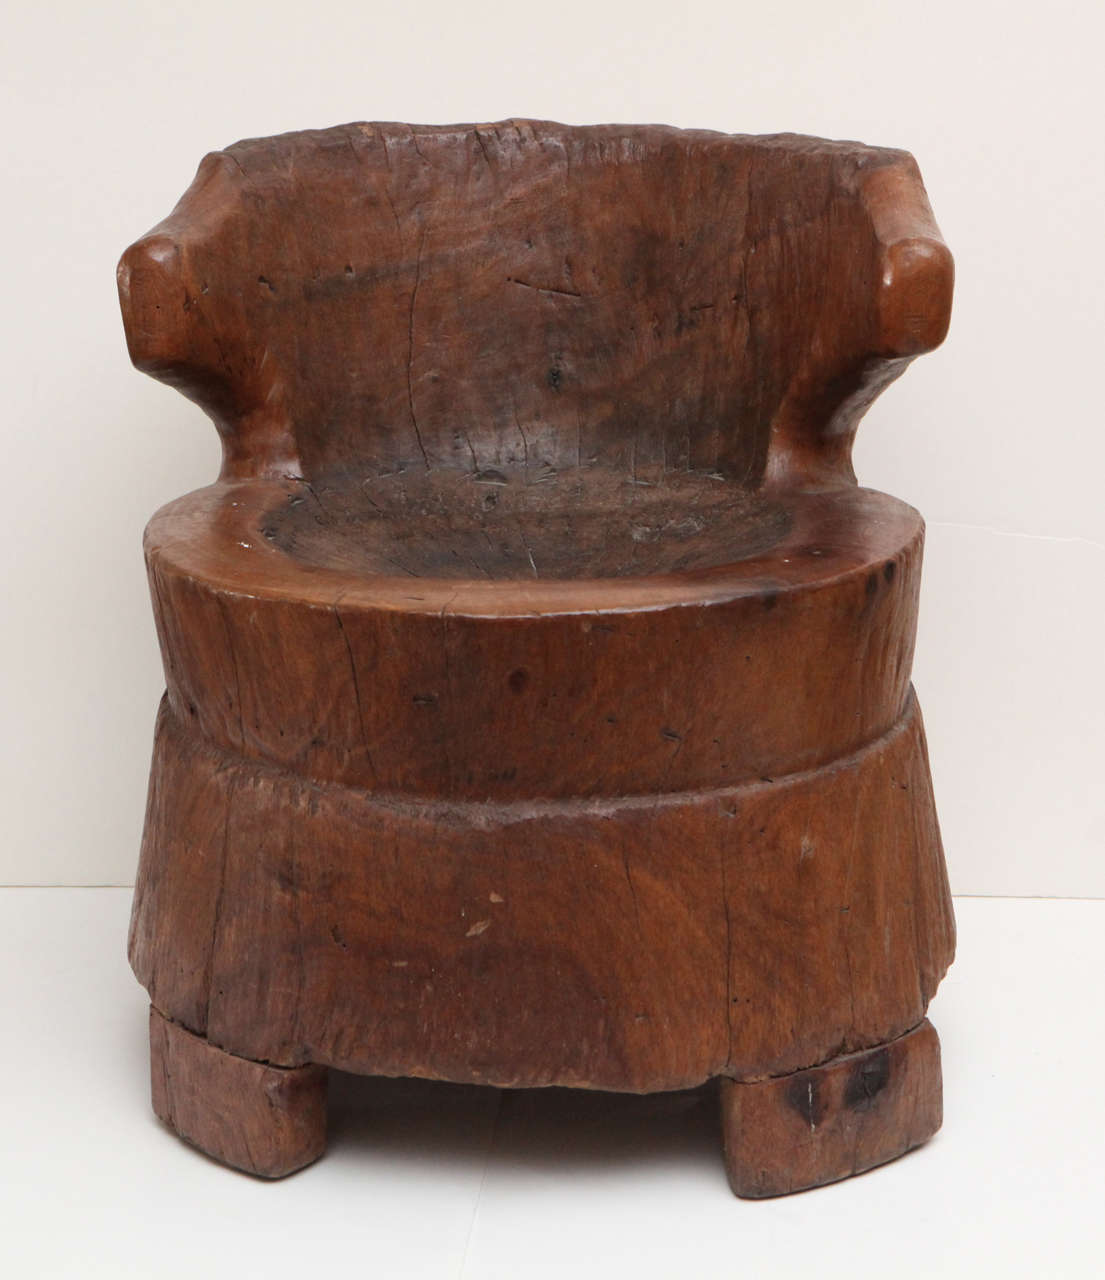 Pair of hand carved tree stumps African chairs, perfect for sitting and holding space, decoratively or functionally. They're size's are slightly different in form (see apron and legs). Perfect balance of design for a modern stark setting.